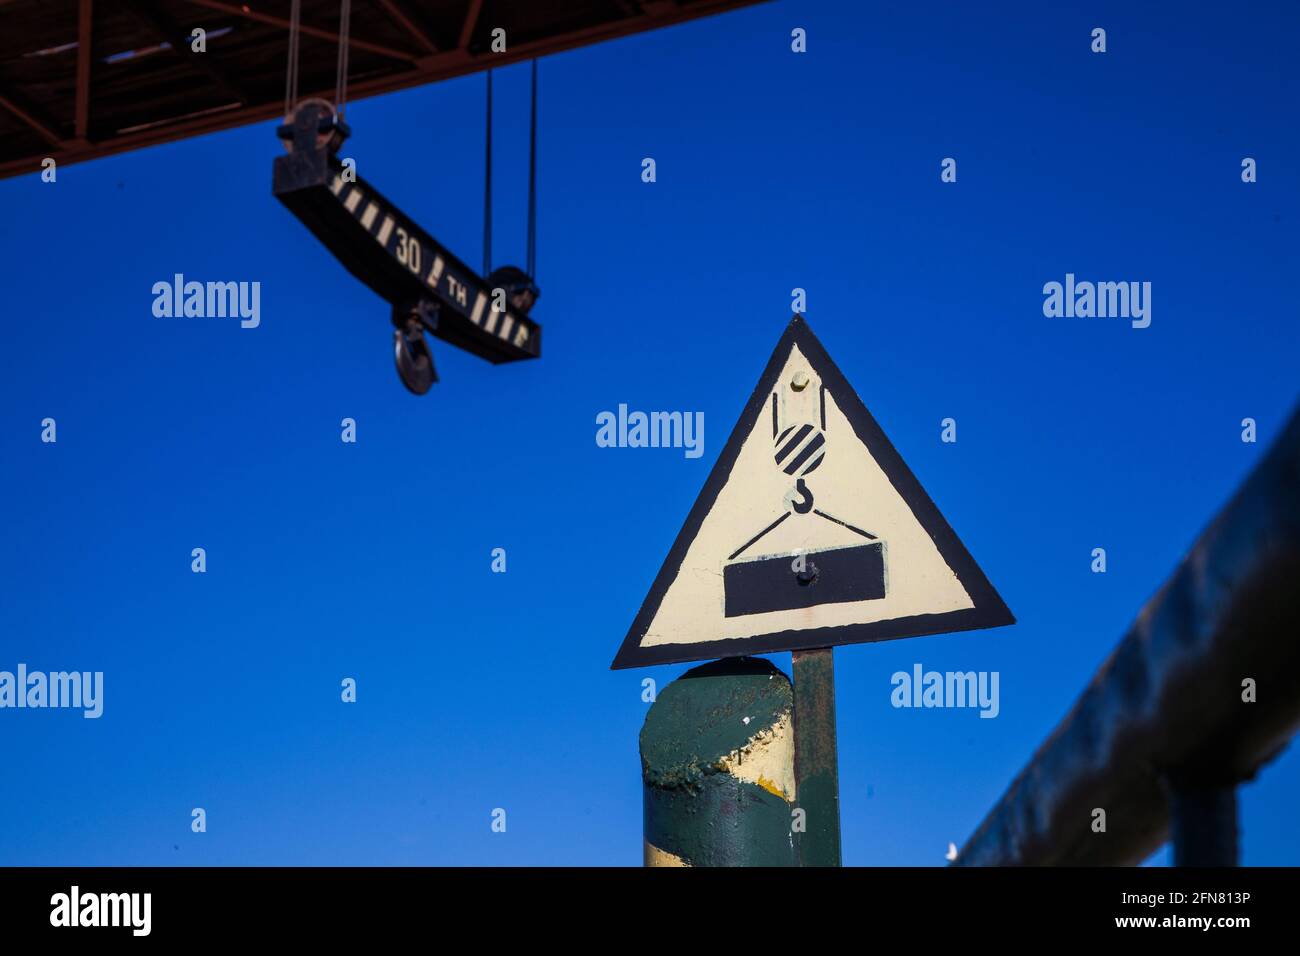 Self-made vintage warning road sign 'Crane working' against deep blue sky. Overhead crane on background, blurred. Stock Photo